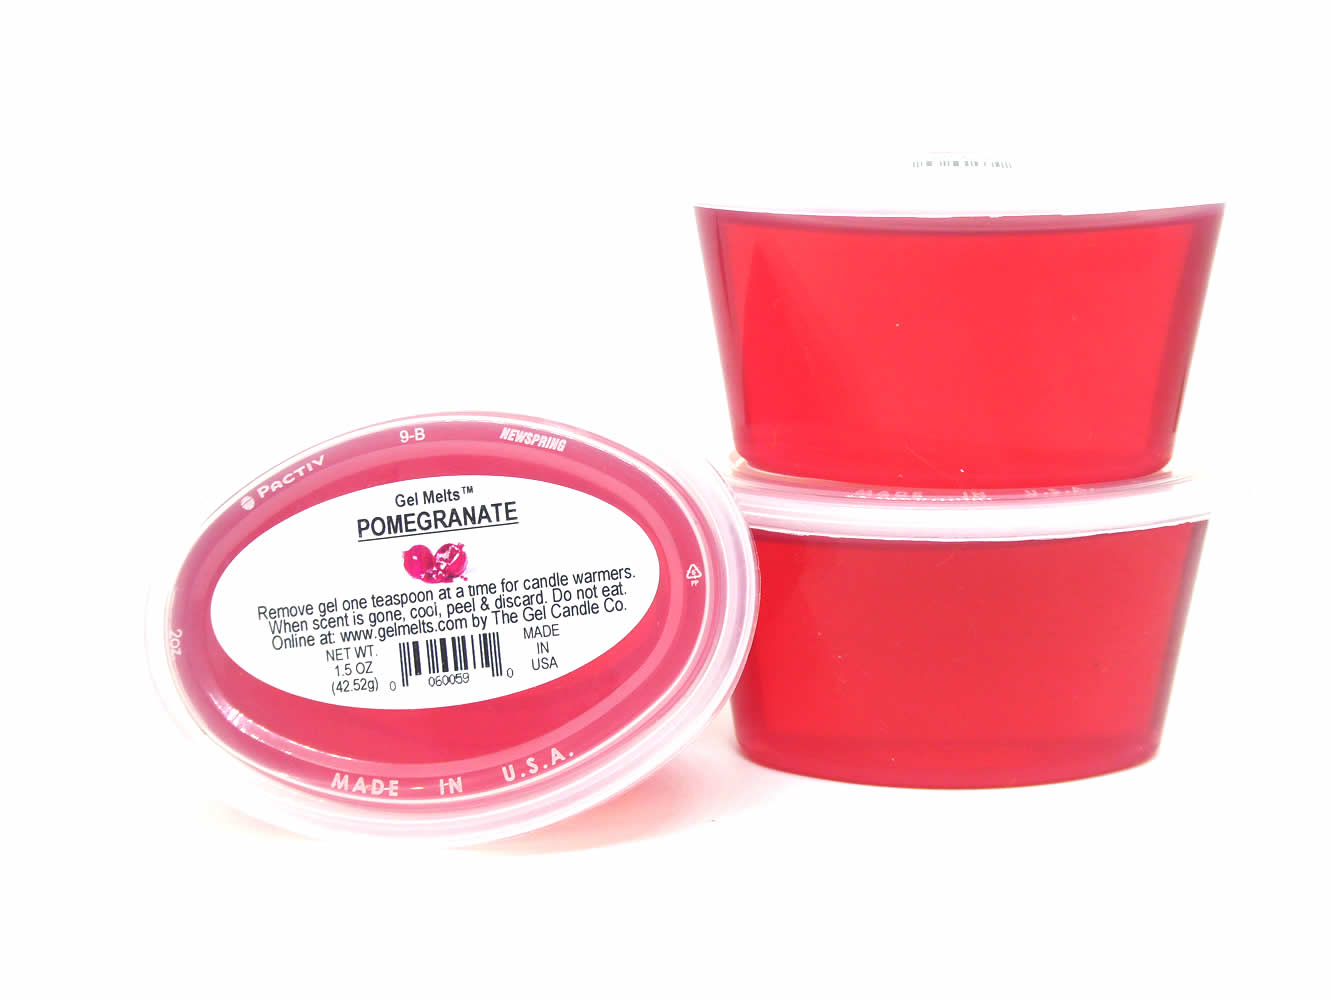 Pomegranate scented Gel Melts™ Gel Wax for warmers - 3 pack - Click Image to Close